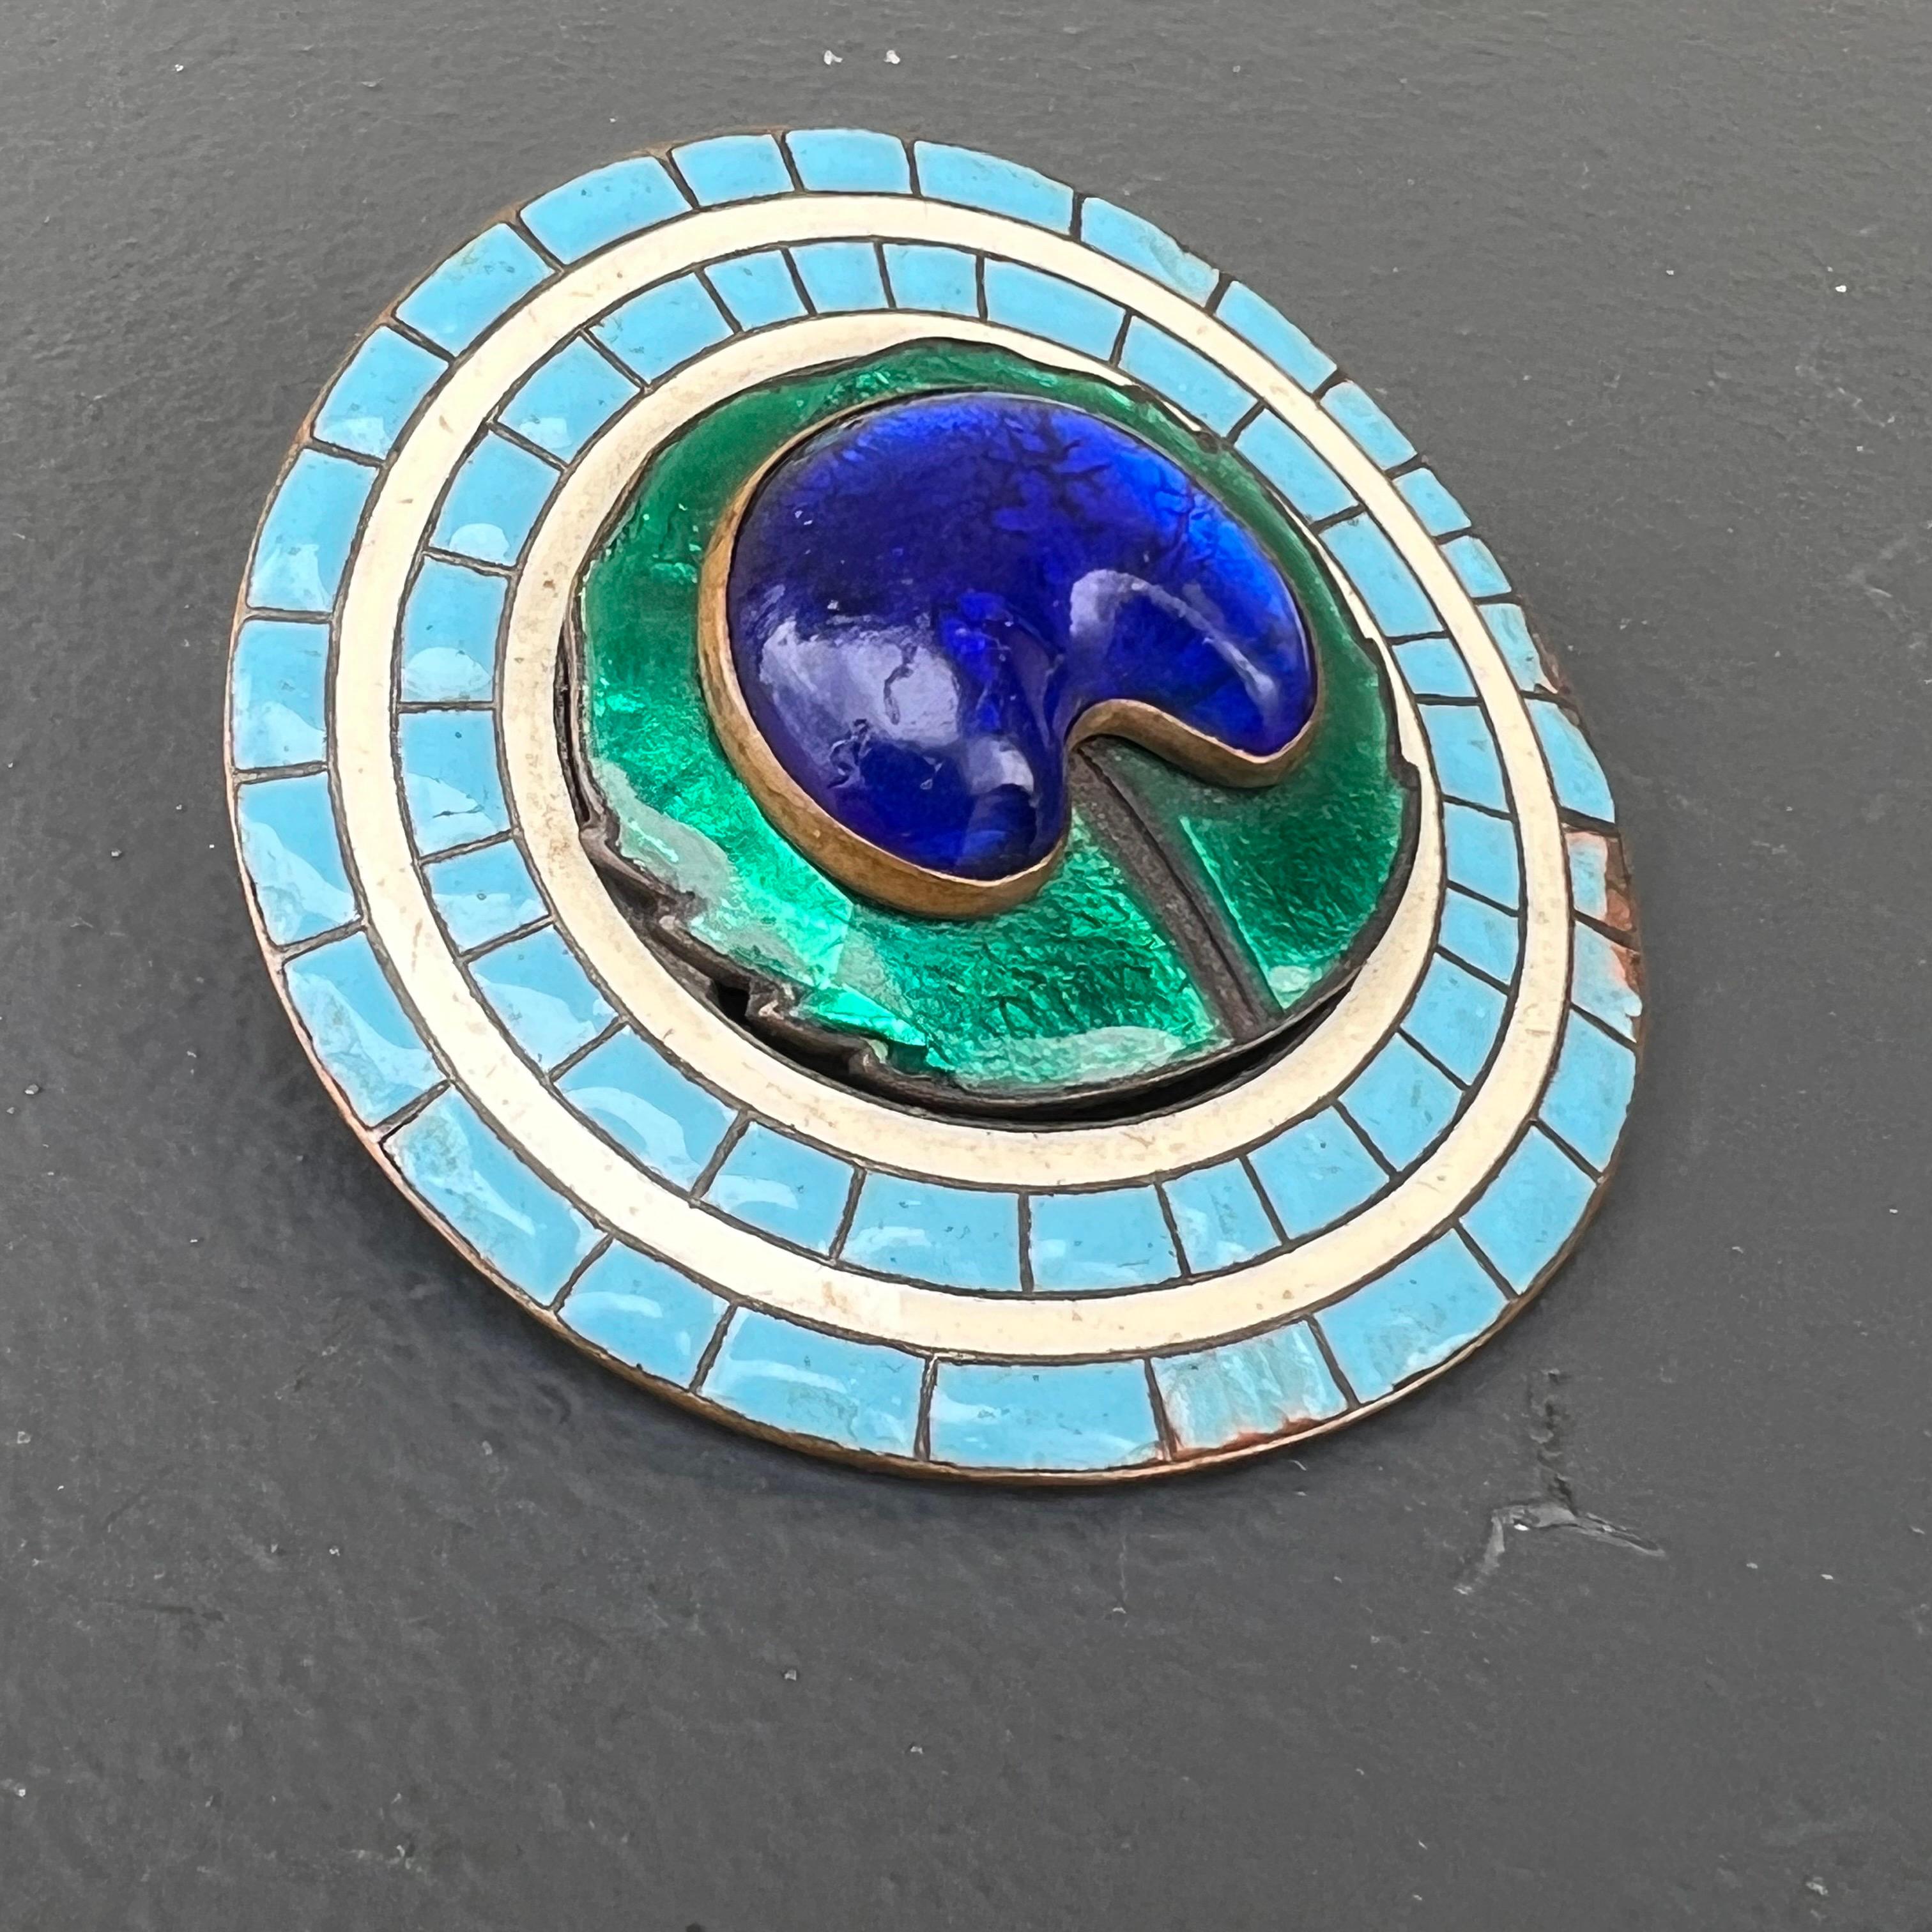 Large Antique Art nouveau Peacock eye Pin /brooch attributed to Piel Frères in Paris, France . Pin features  a central foil glass set on an what looks like copper as base metal with enamel work on front side.
Most likely pin is converted from an